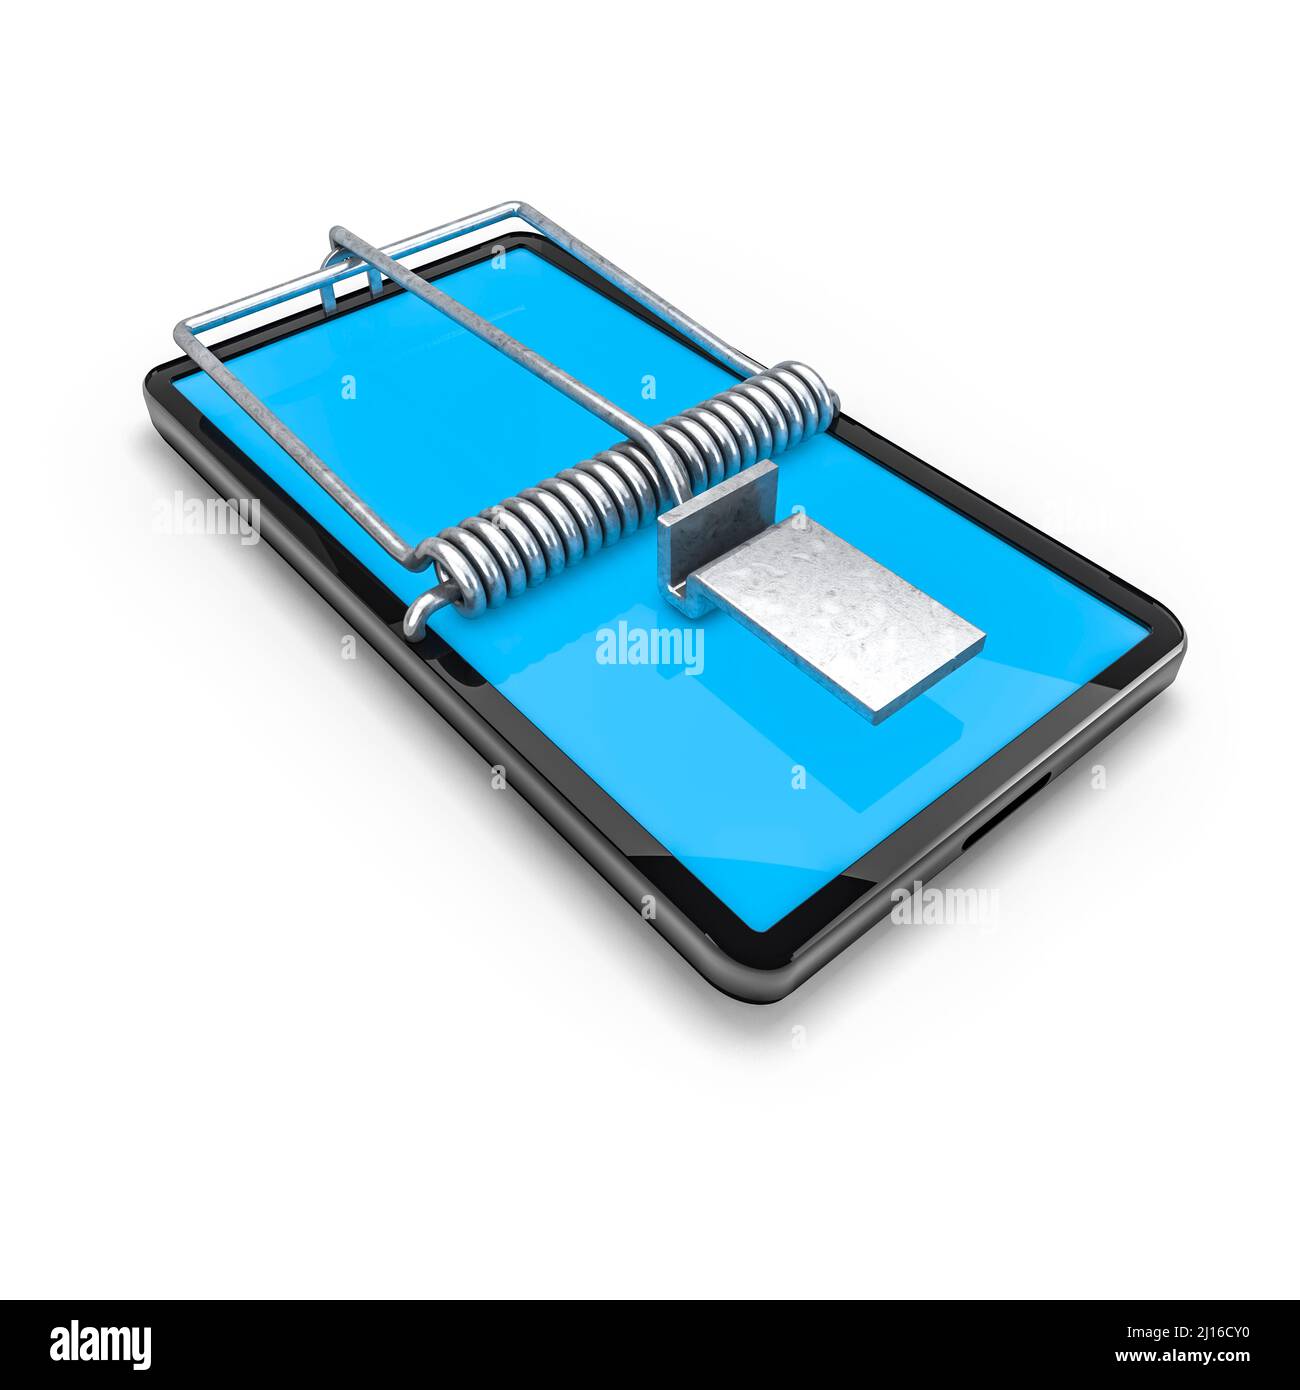 Mobile phone trap - 3D illustration of cellphone mousetrap contraption on white studio background Stock Photo